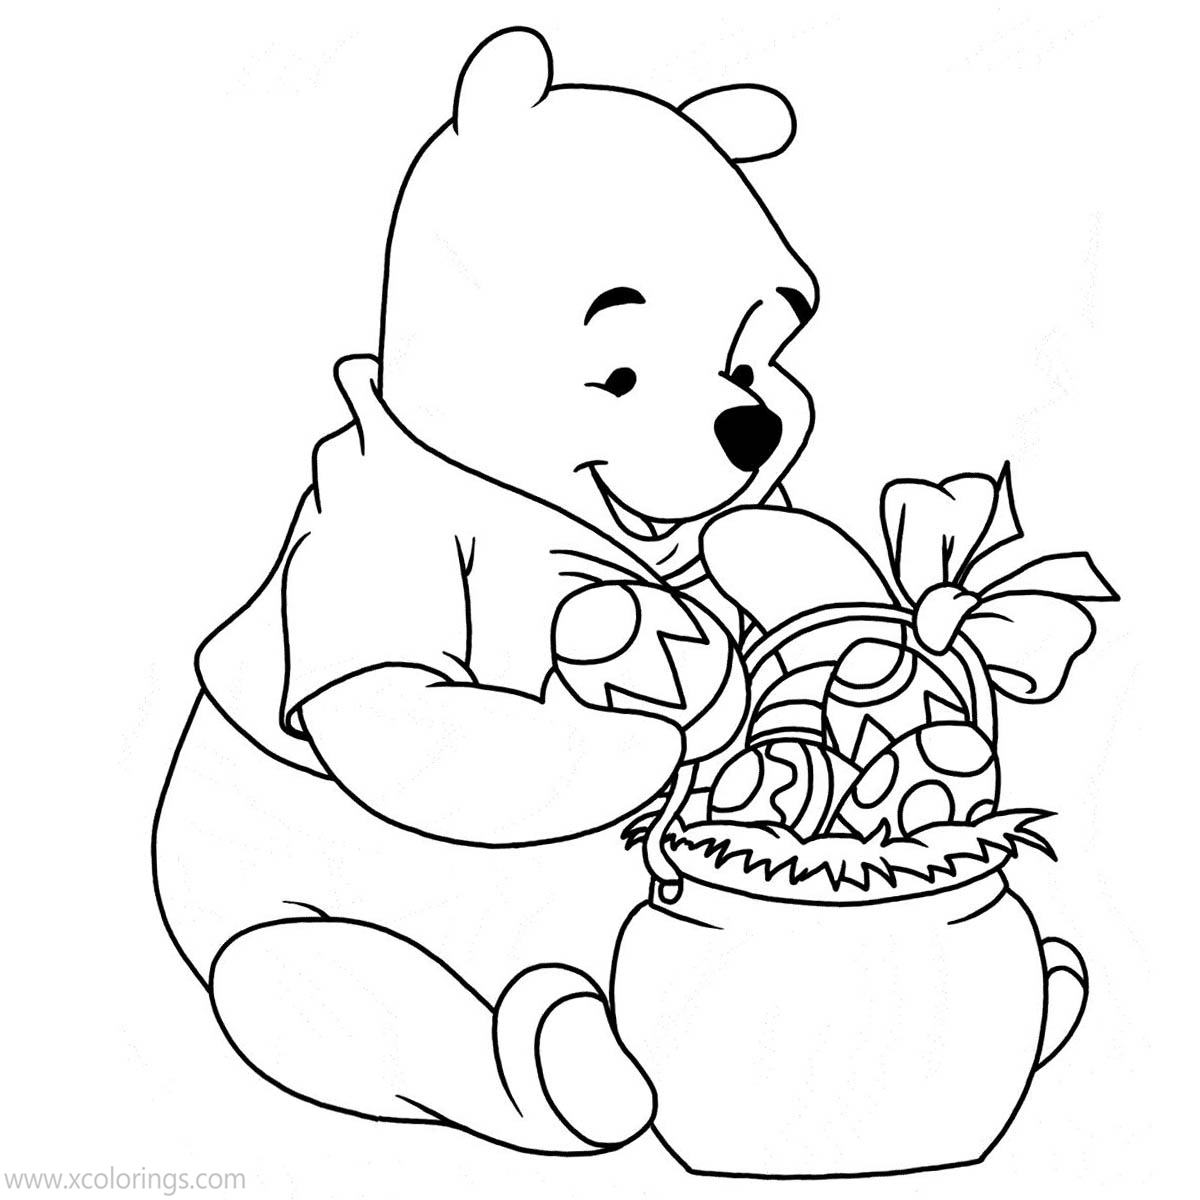 Free Disney Winnie The Pooh Easter Coloring Pages with Eggs printable